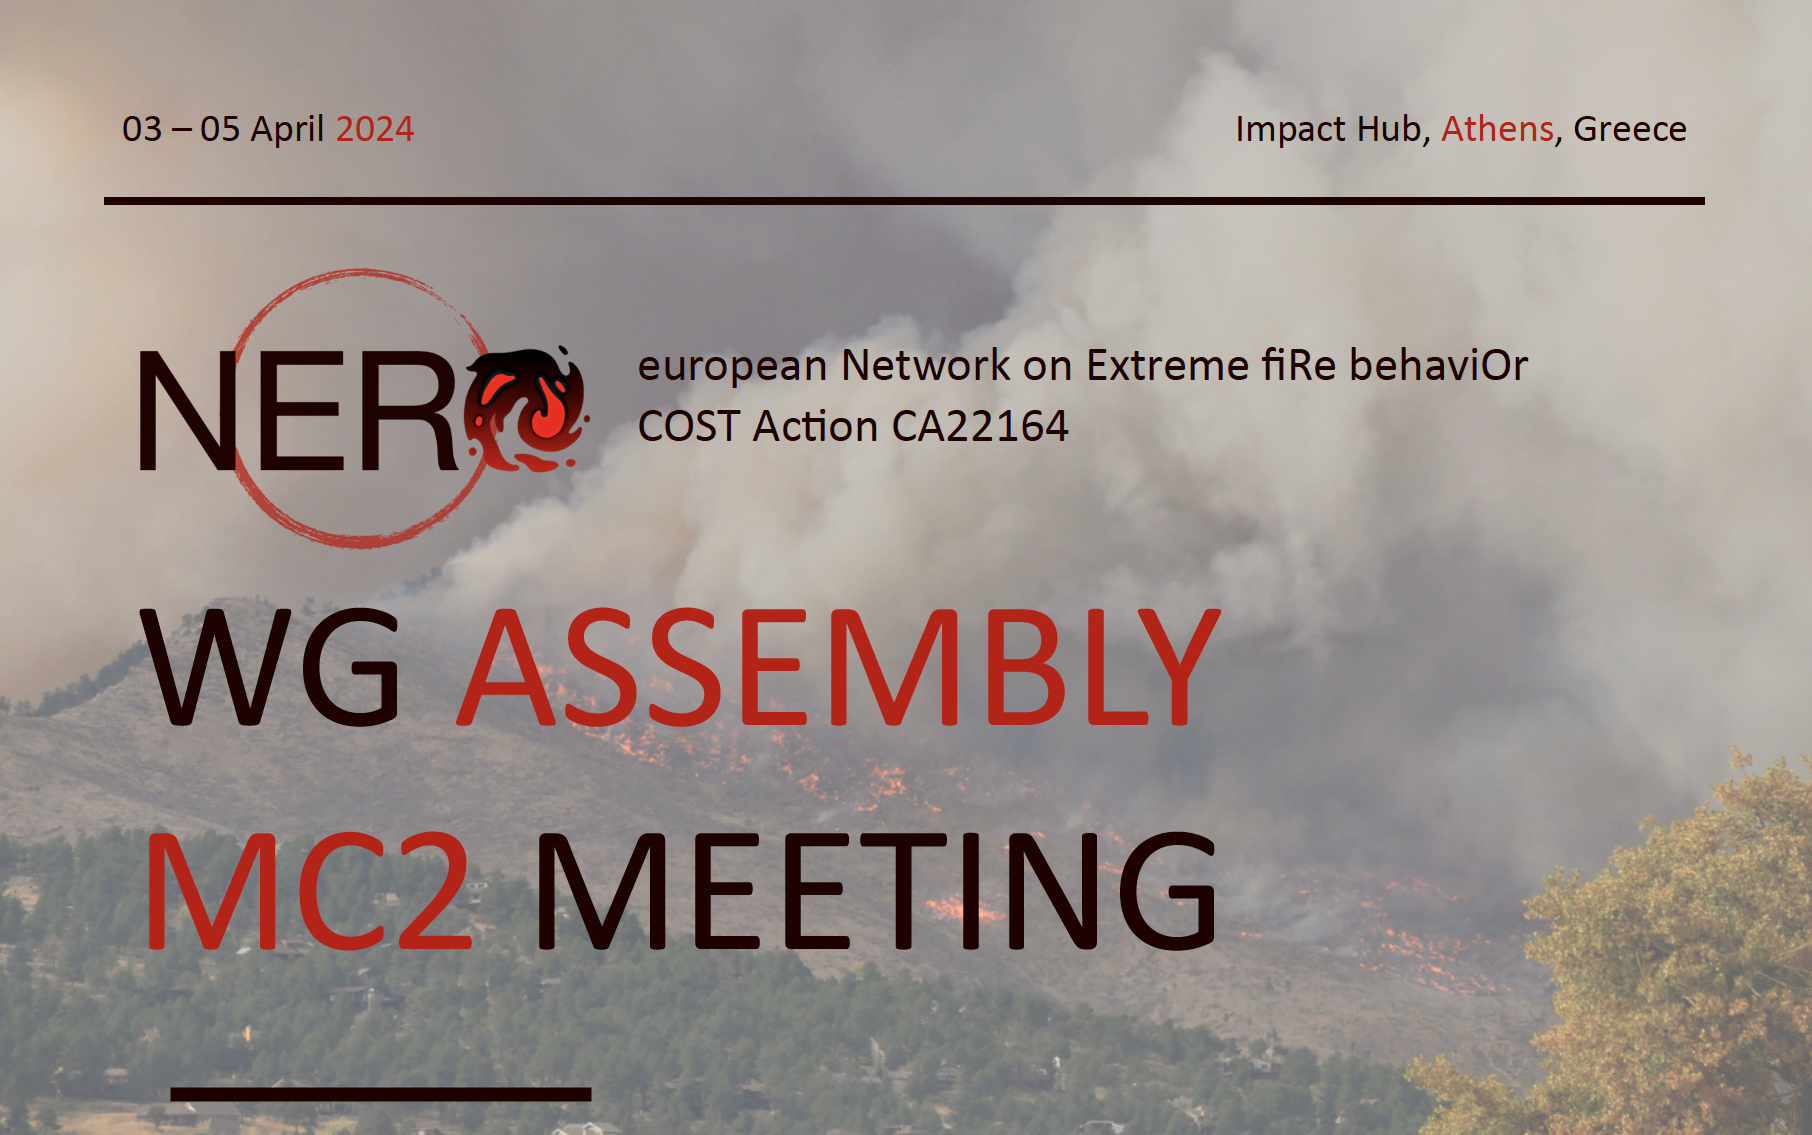 Coming up: NERO WG Assembly & MC2 Meeting